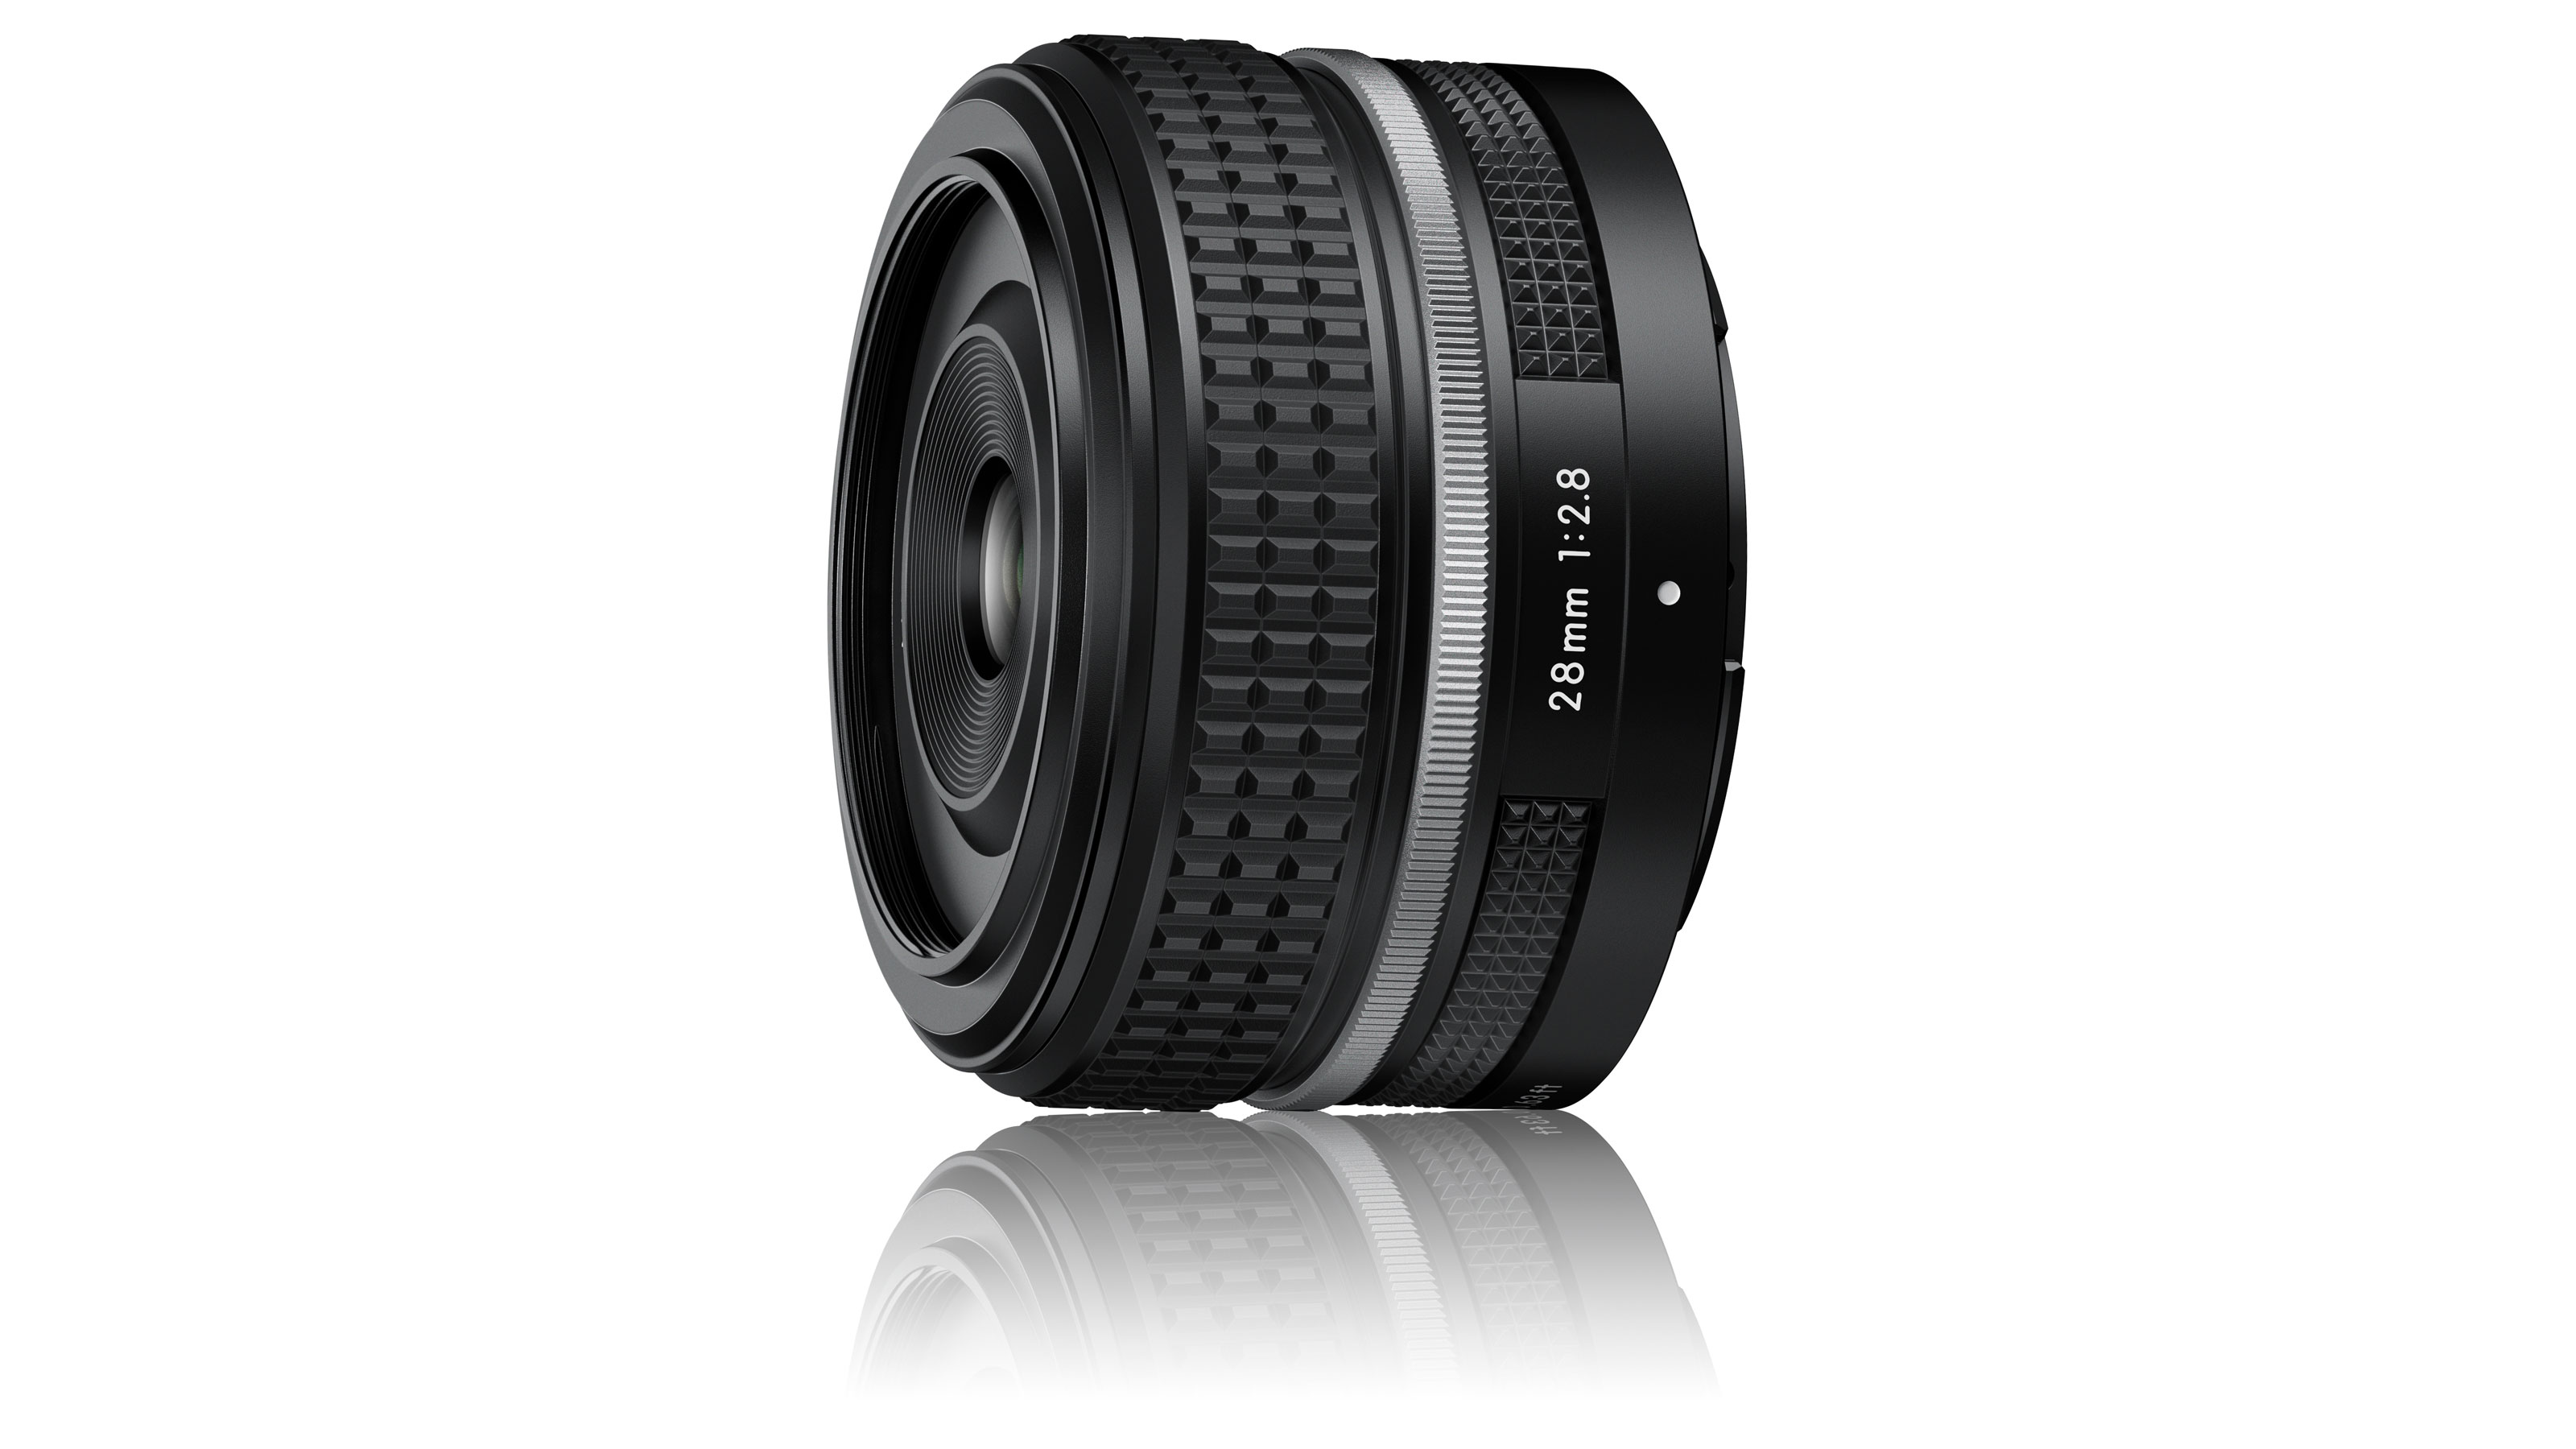 Meet the new Nikkor Z 28mm f/2.8 Special Edition lens launched